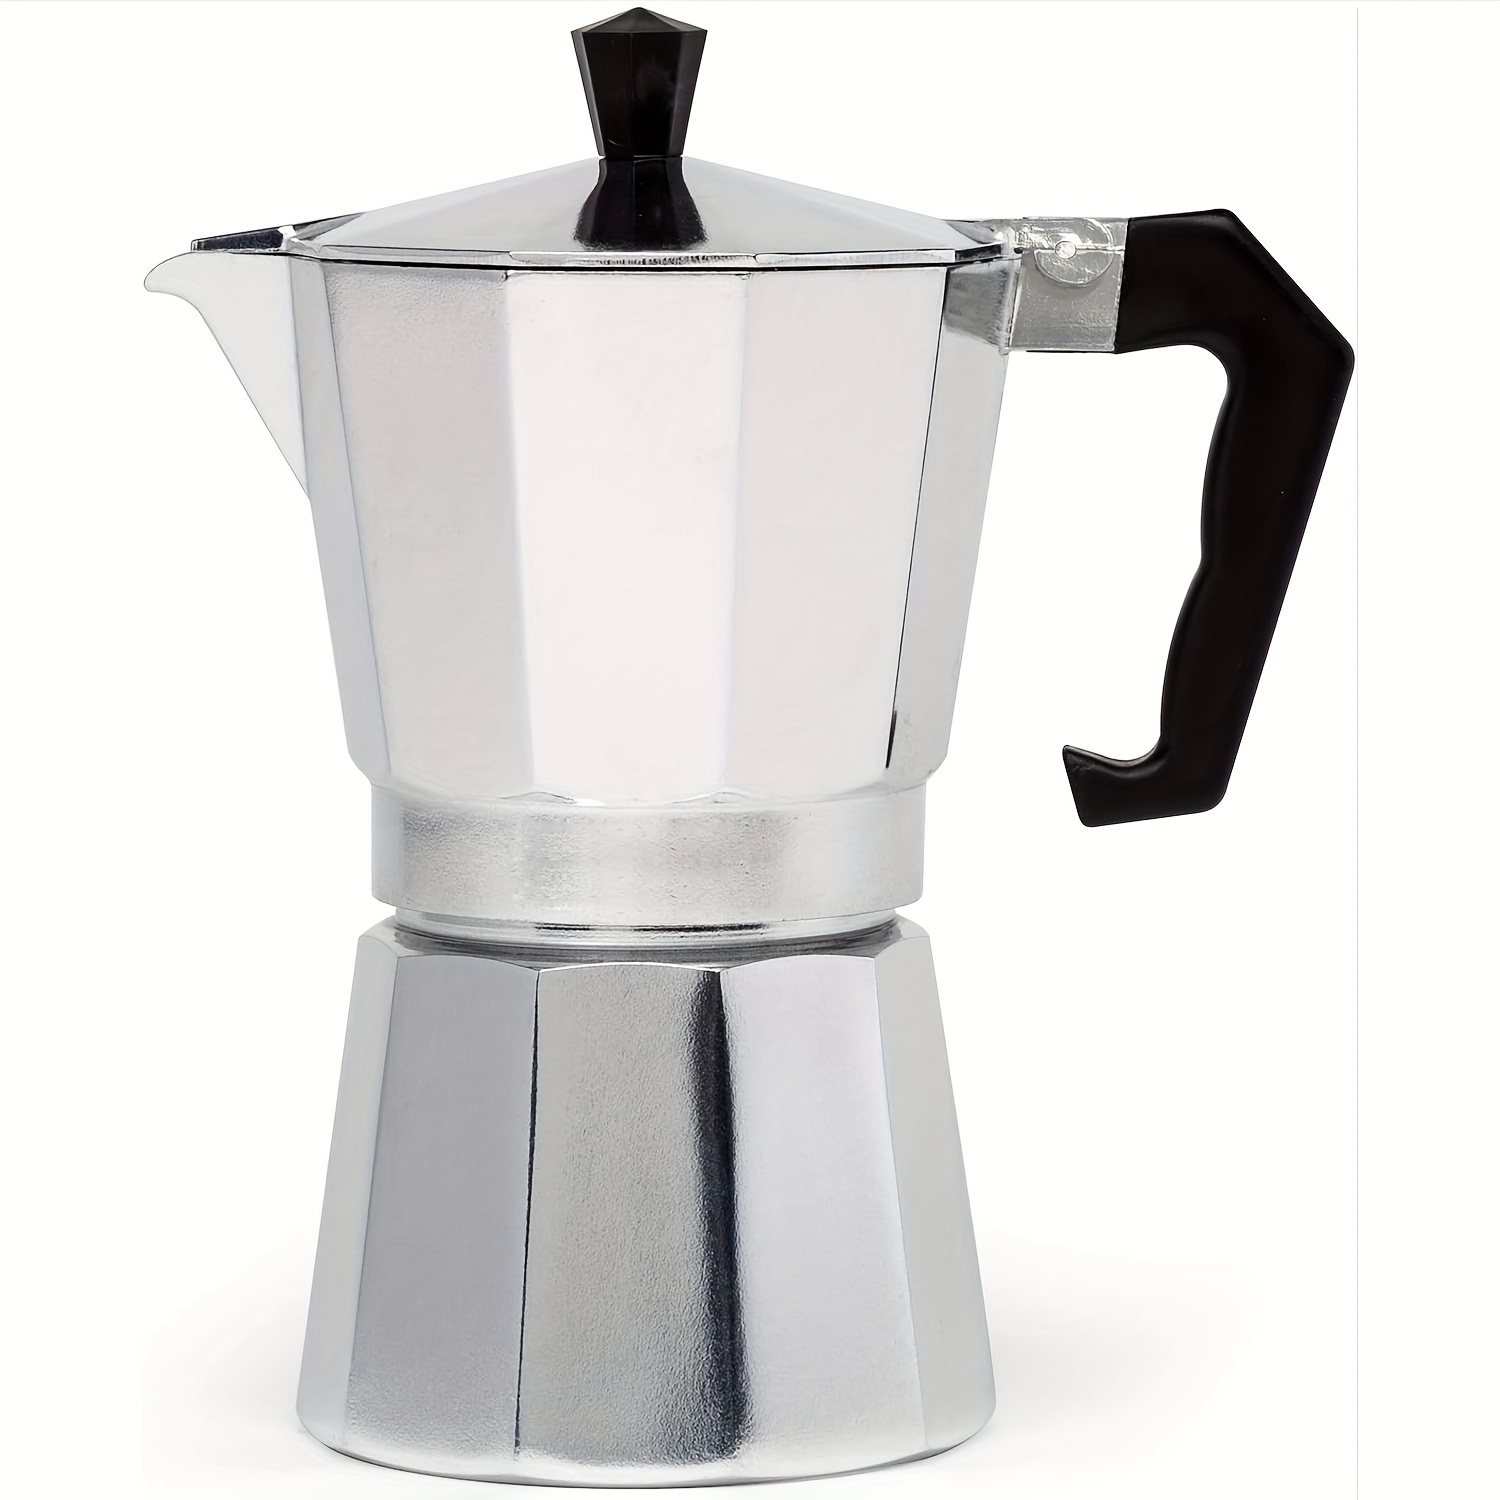 MVPLUE Classic Stovetop Espresso Maker 6 Cup ，Moka Pot Aluminum  Silver，Cuban Coffee Maker， Make Delicious Coffee Easily at Home And Camping